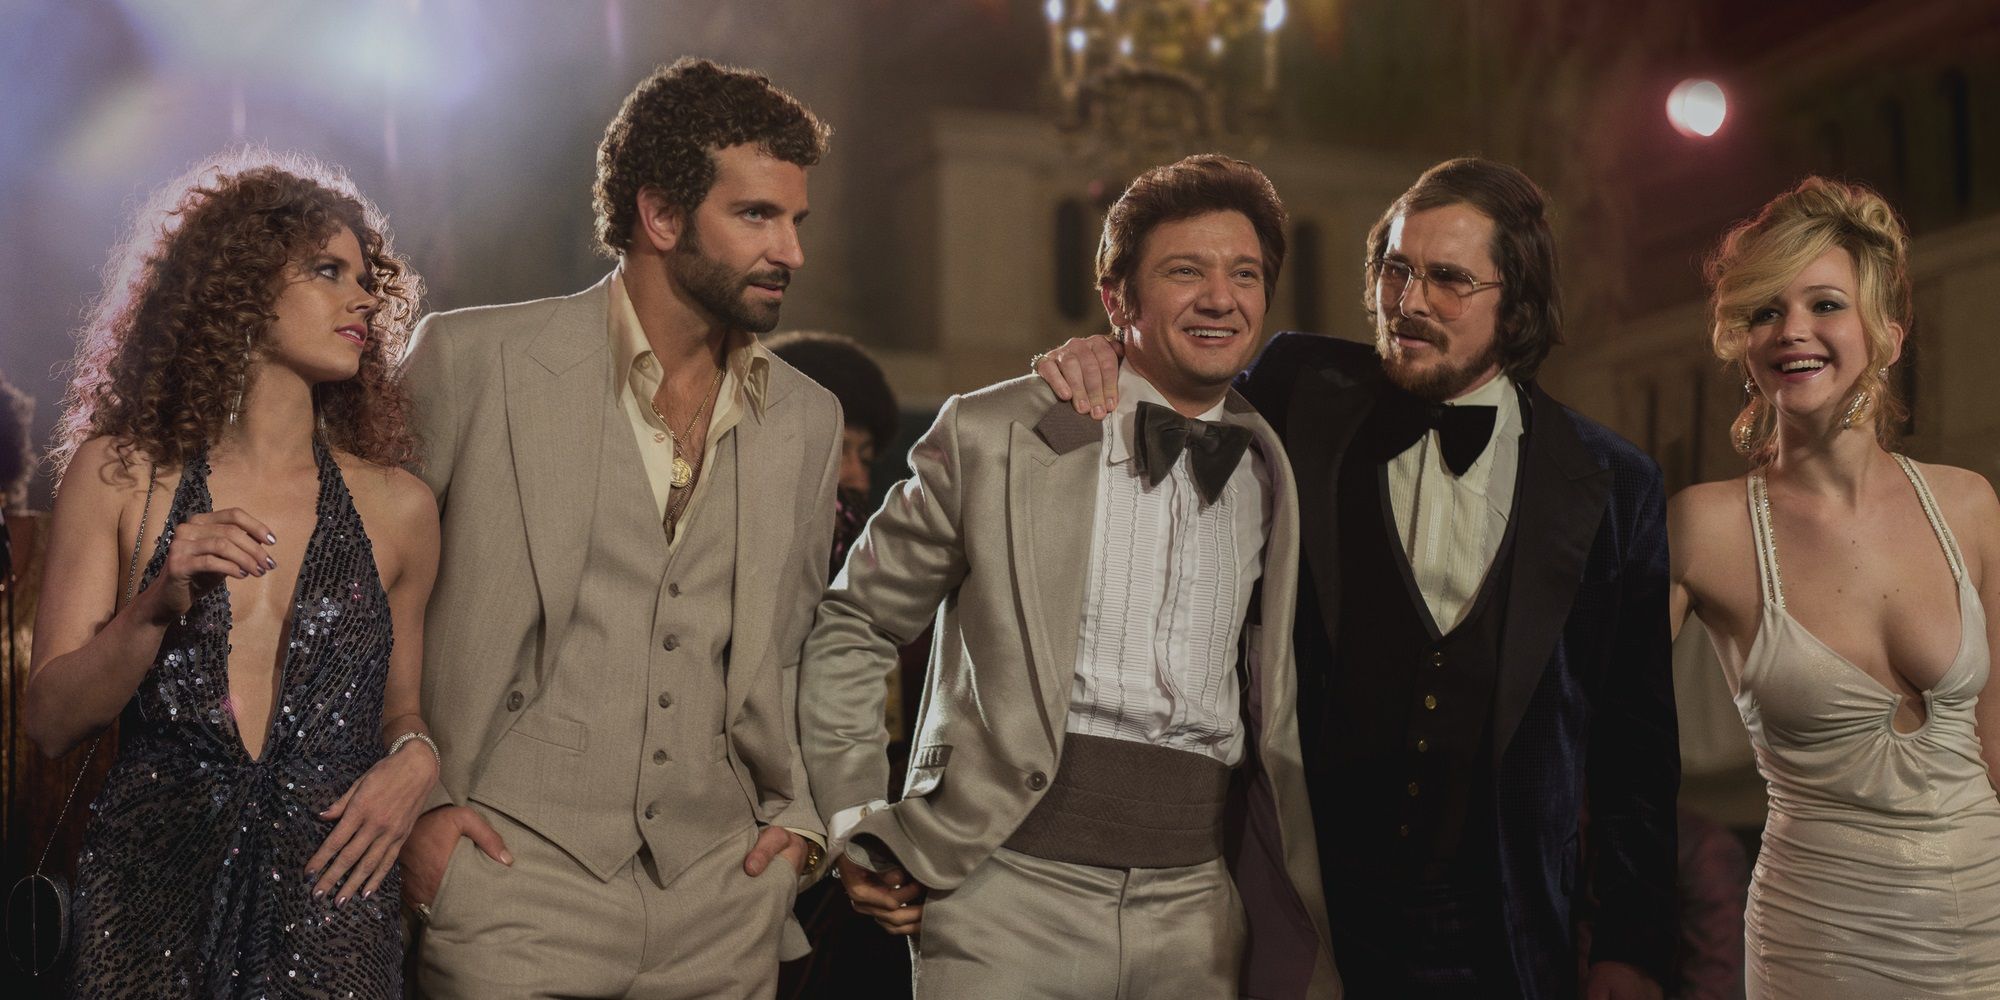 The cast of American Hustle standing together